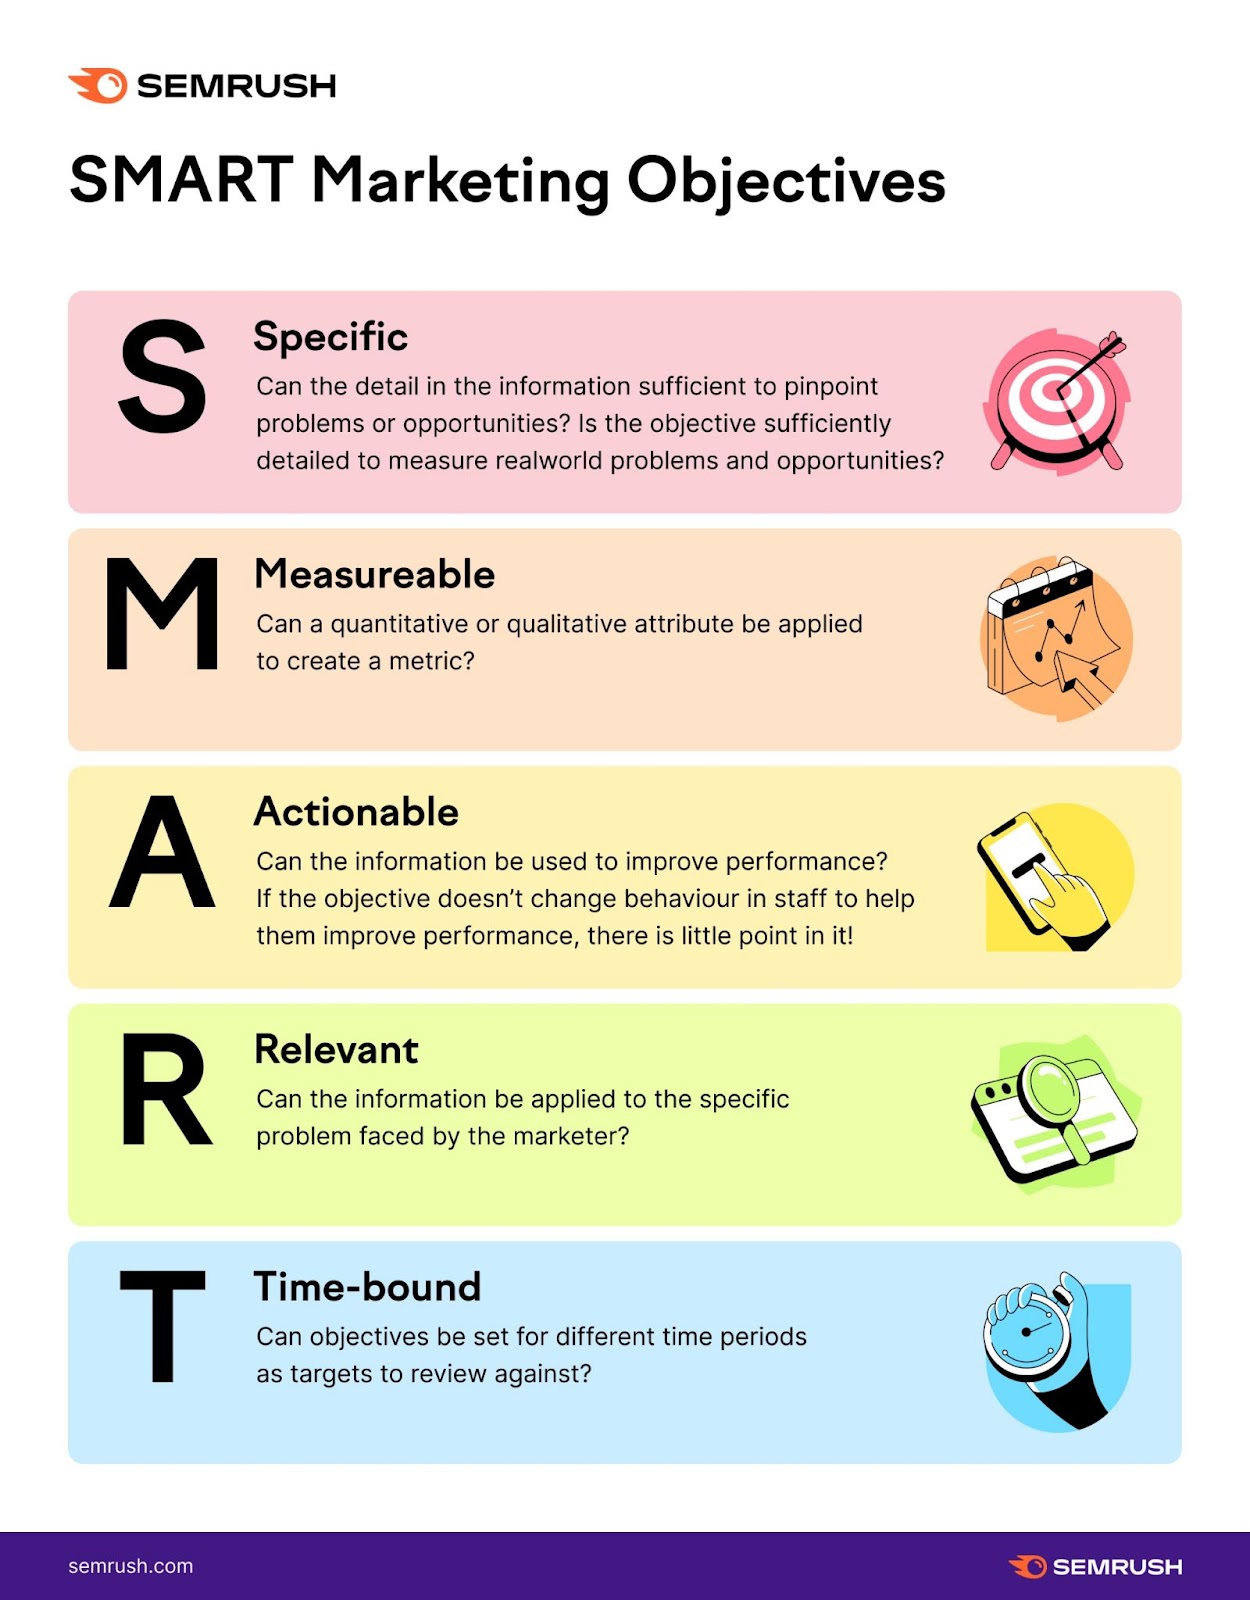 An infographic by Semrush explaining what SMART marketing objectives stand for